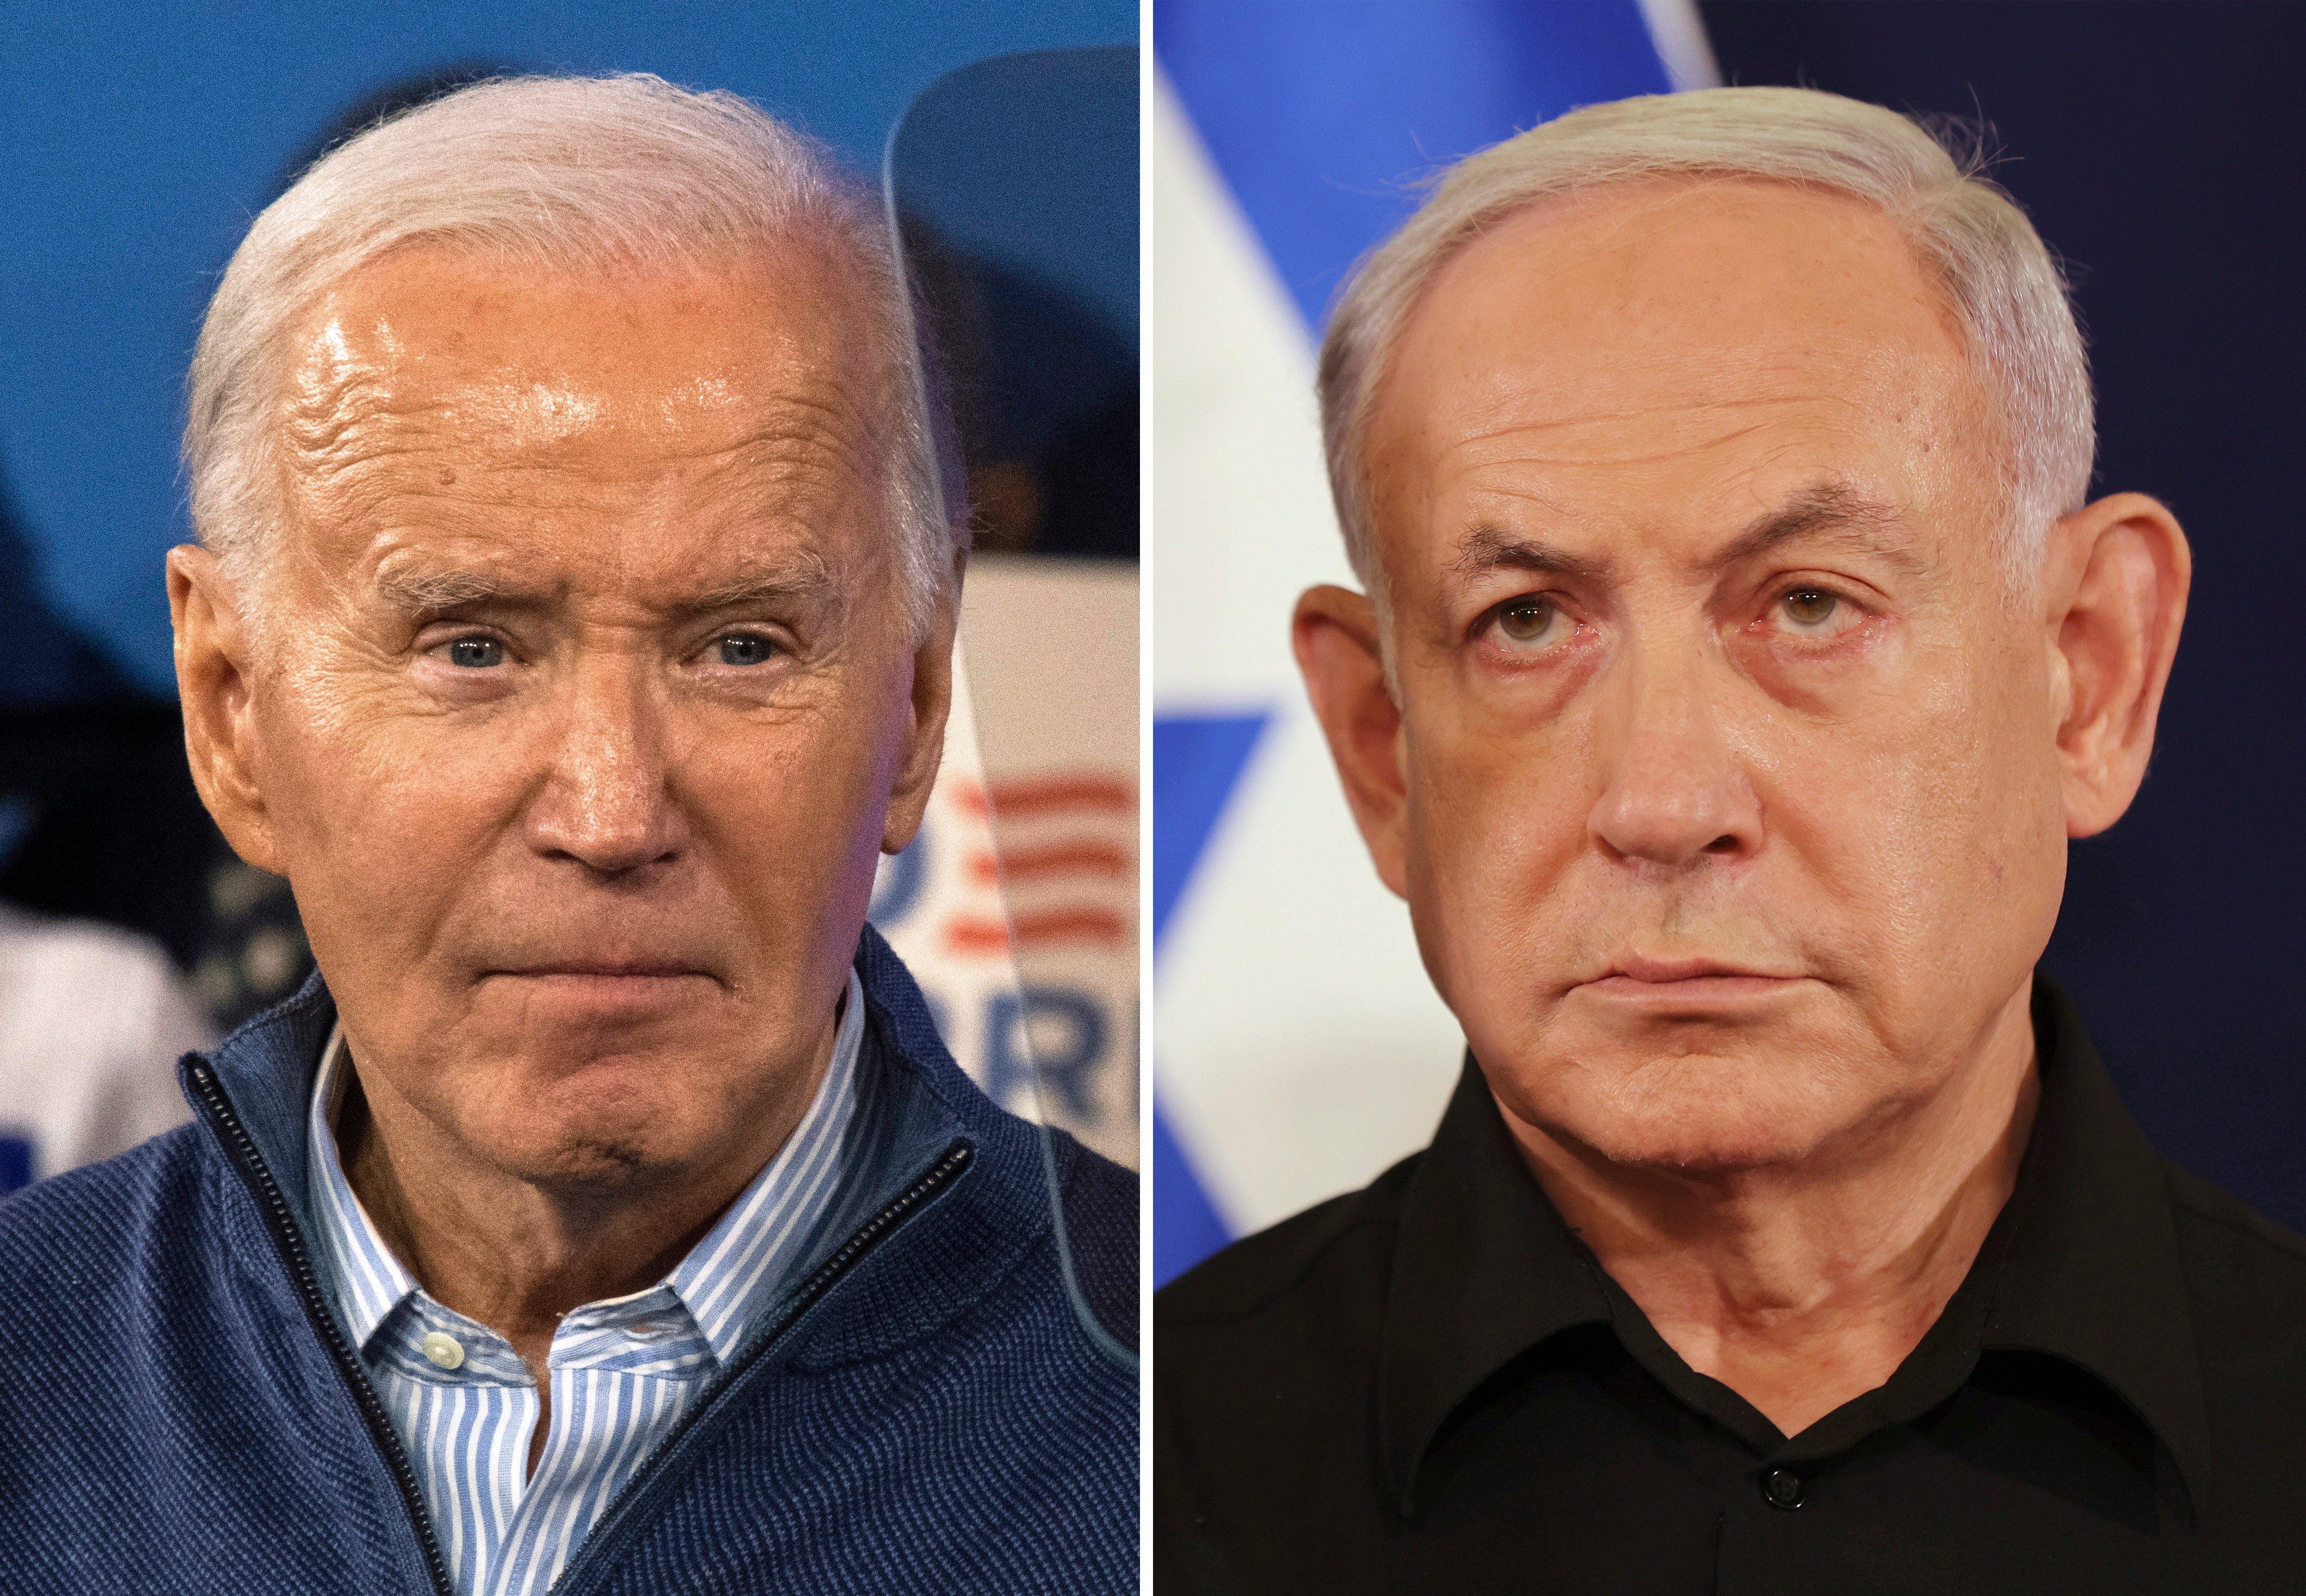 It was the first time the two had spoken since seven international aid workers were killed in Gaza, and Biden pulled no punches